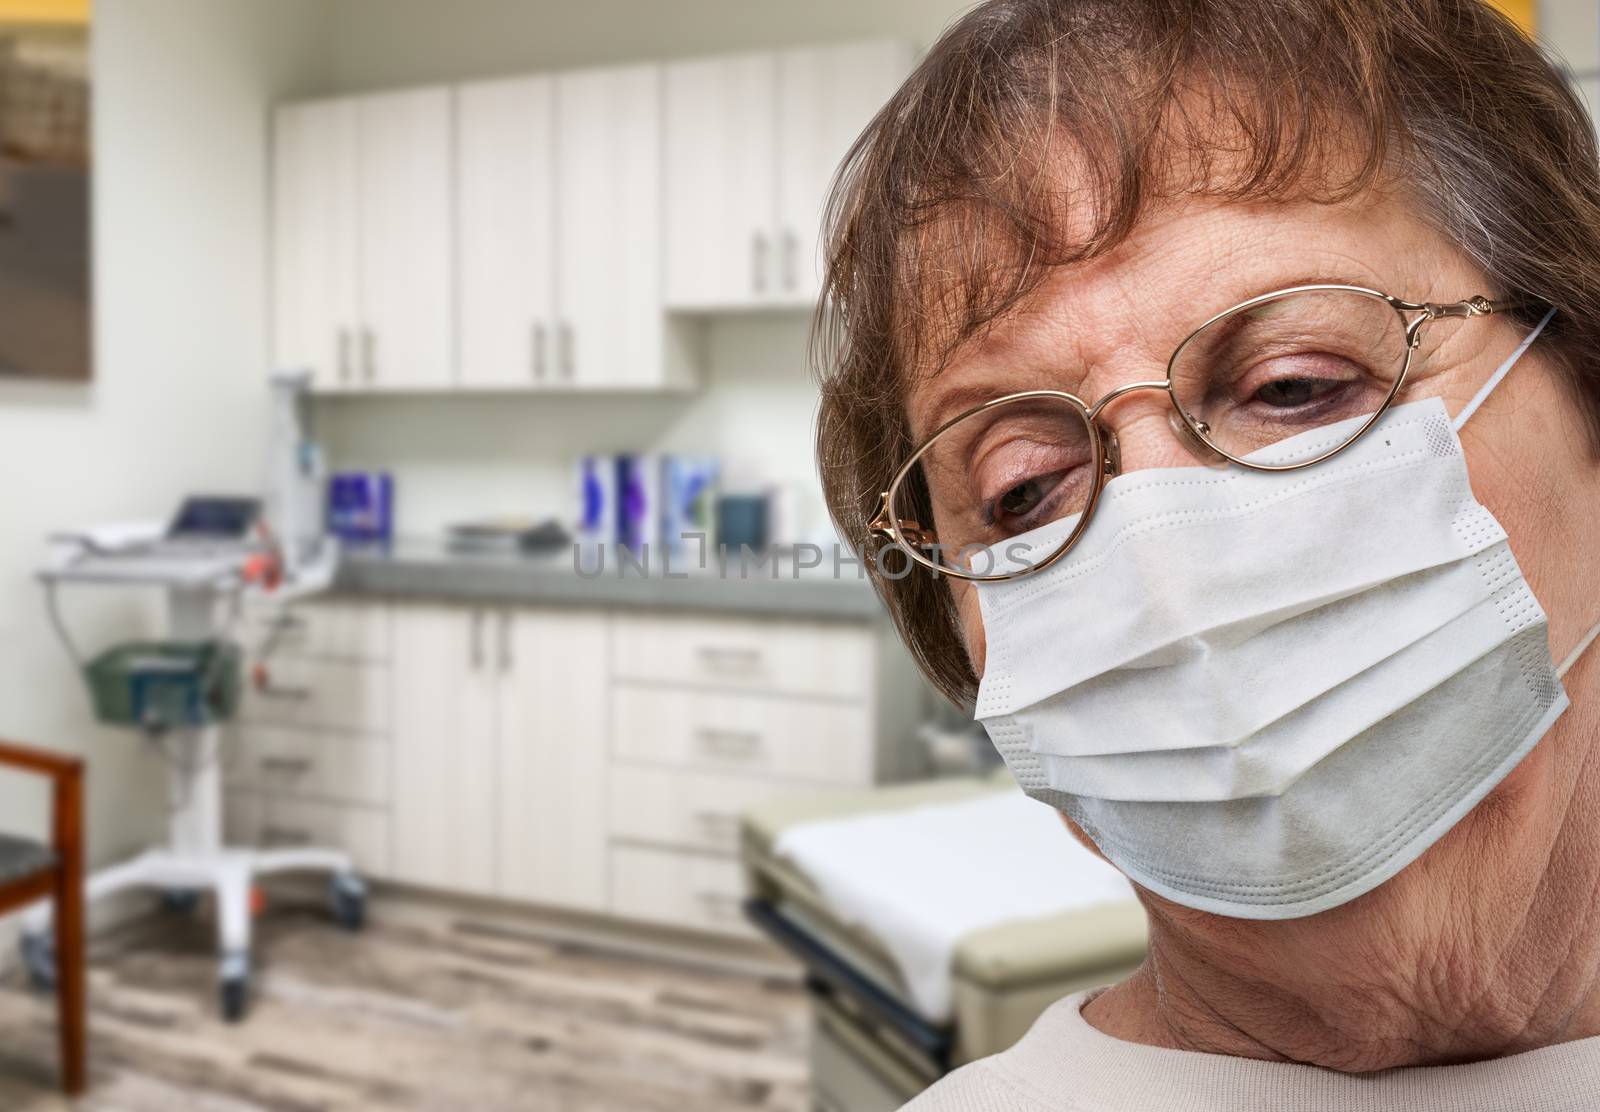 Concerned Senior Adult Woman Wearing Medical Face Mask Waiting In Doctor Office. by Feverpitched